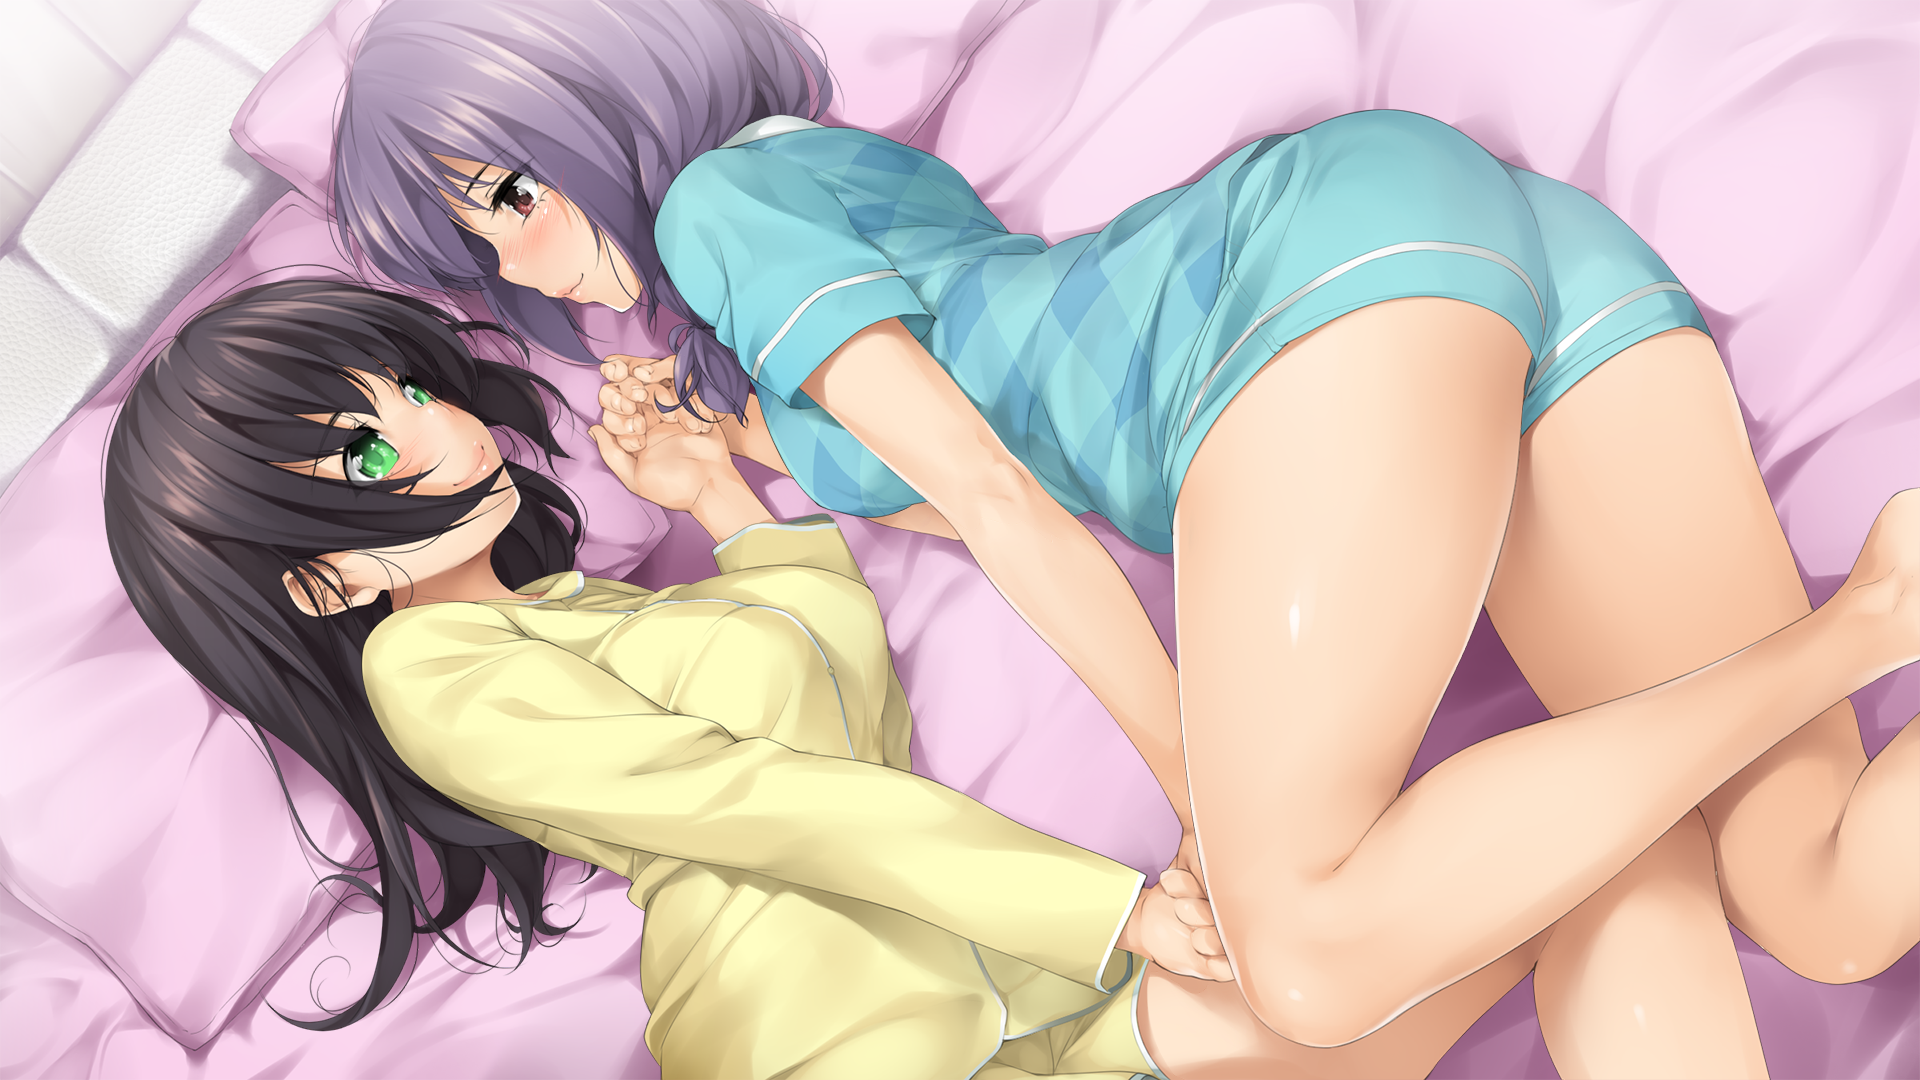 1920px x 1080px - 100 Per Cent Uncensored' Sex Game Now Out On Steam, But Not ...